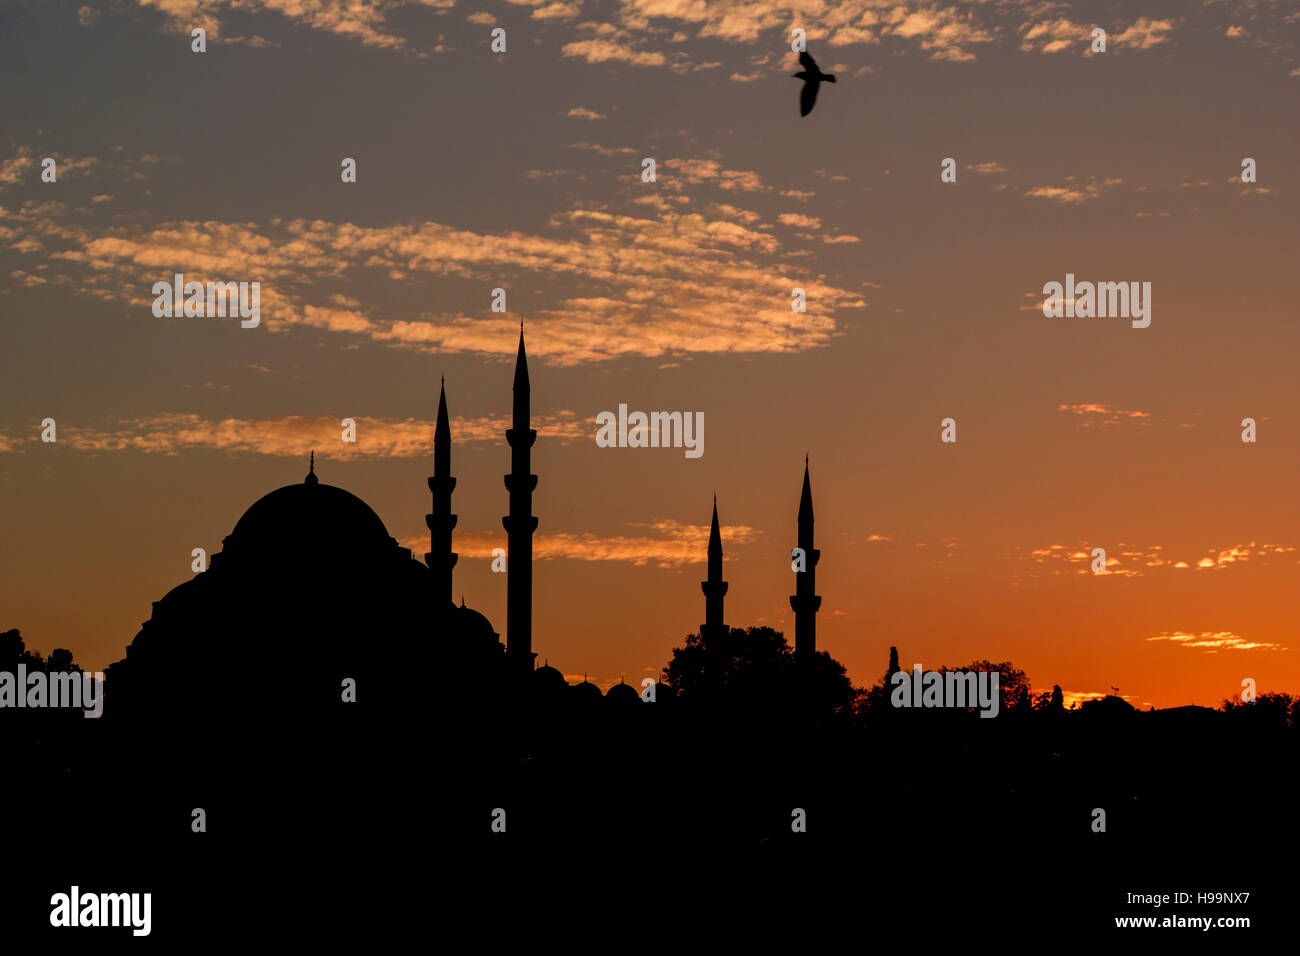 silhouette view of a mosque in istanbul Stock Photo